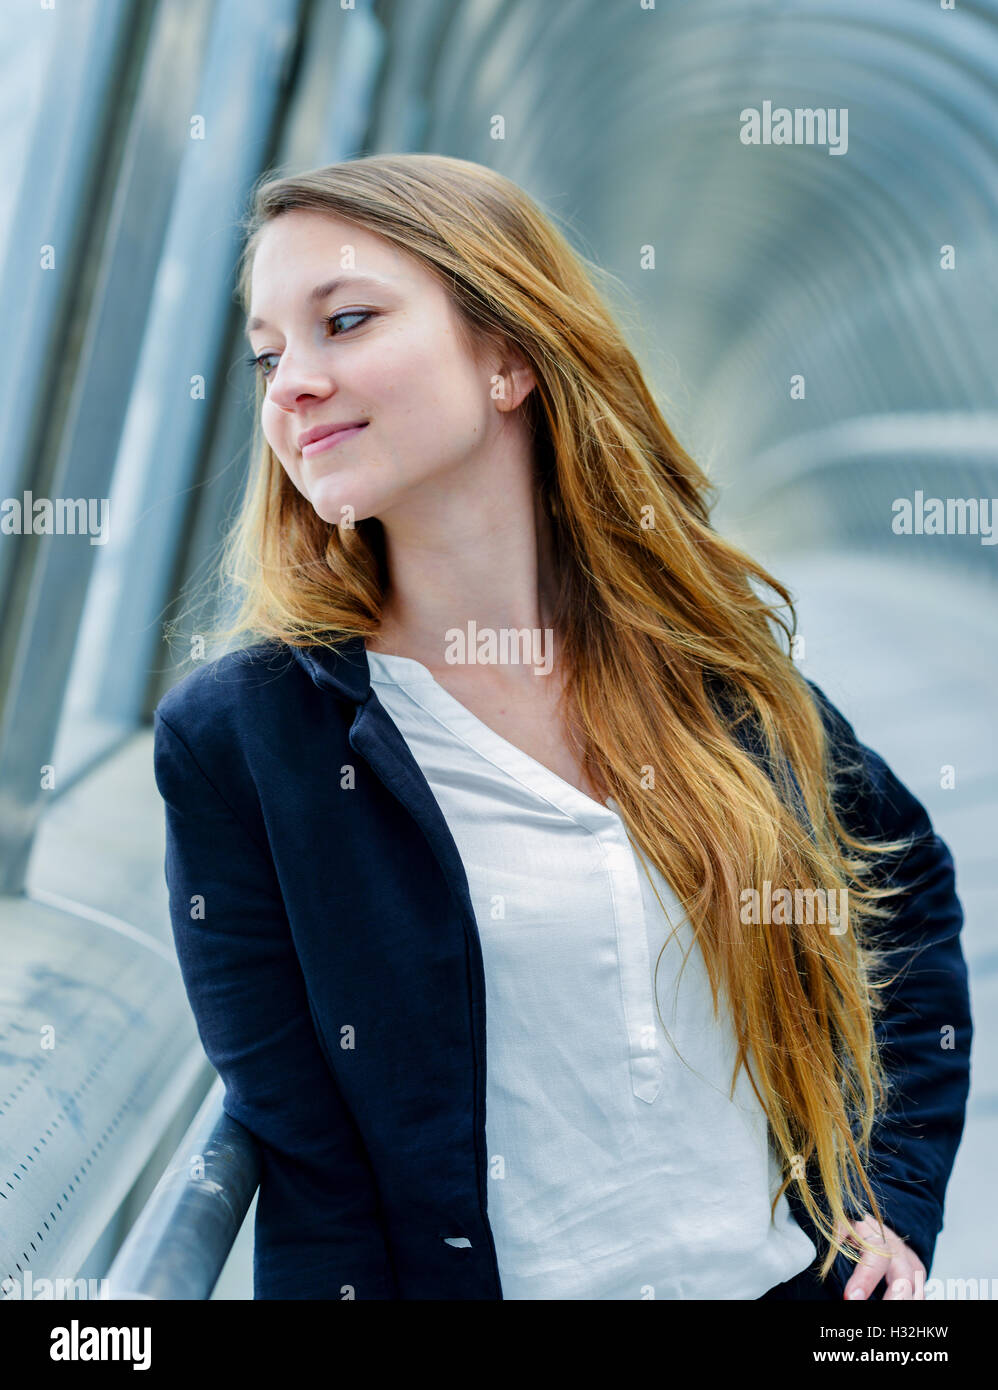 Outdoor portrait of a pretty dynamic junior executive Stock Photo